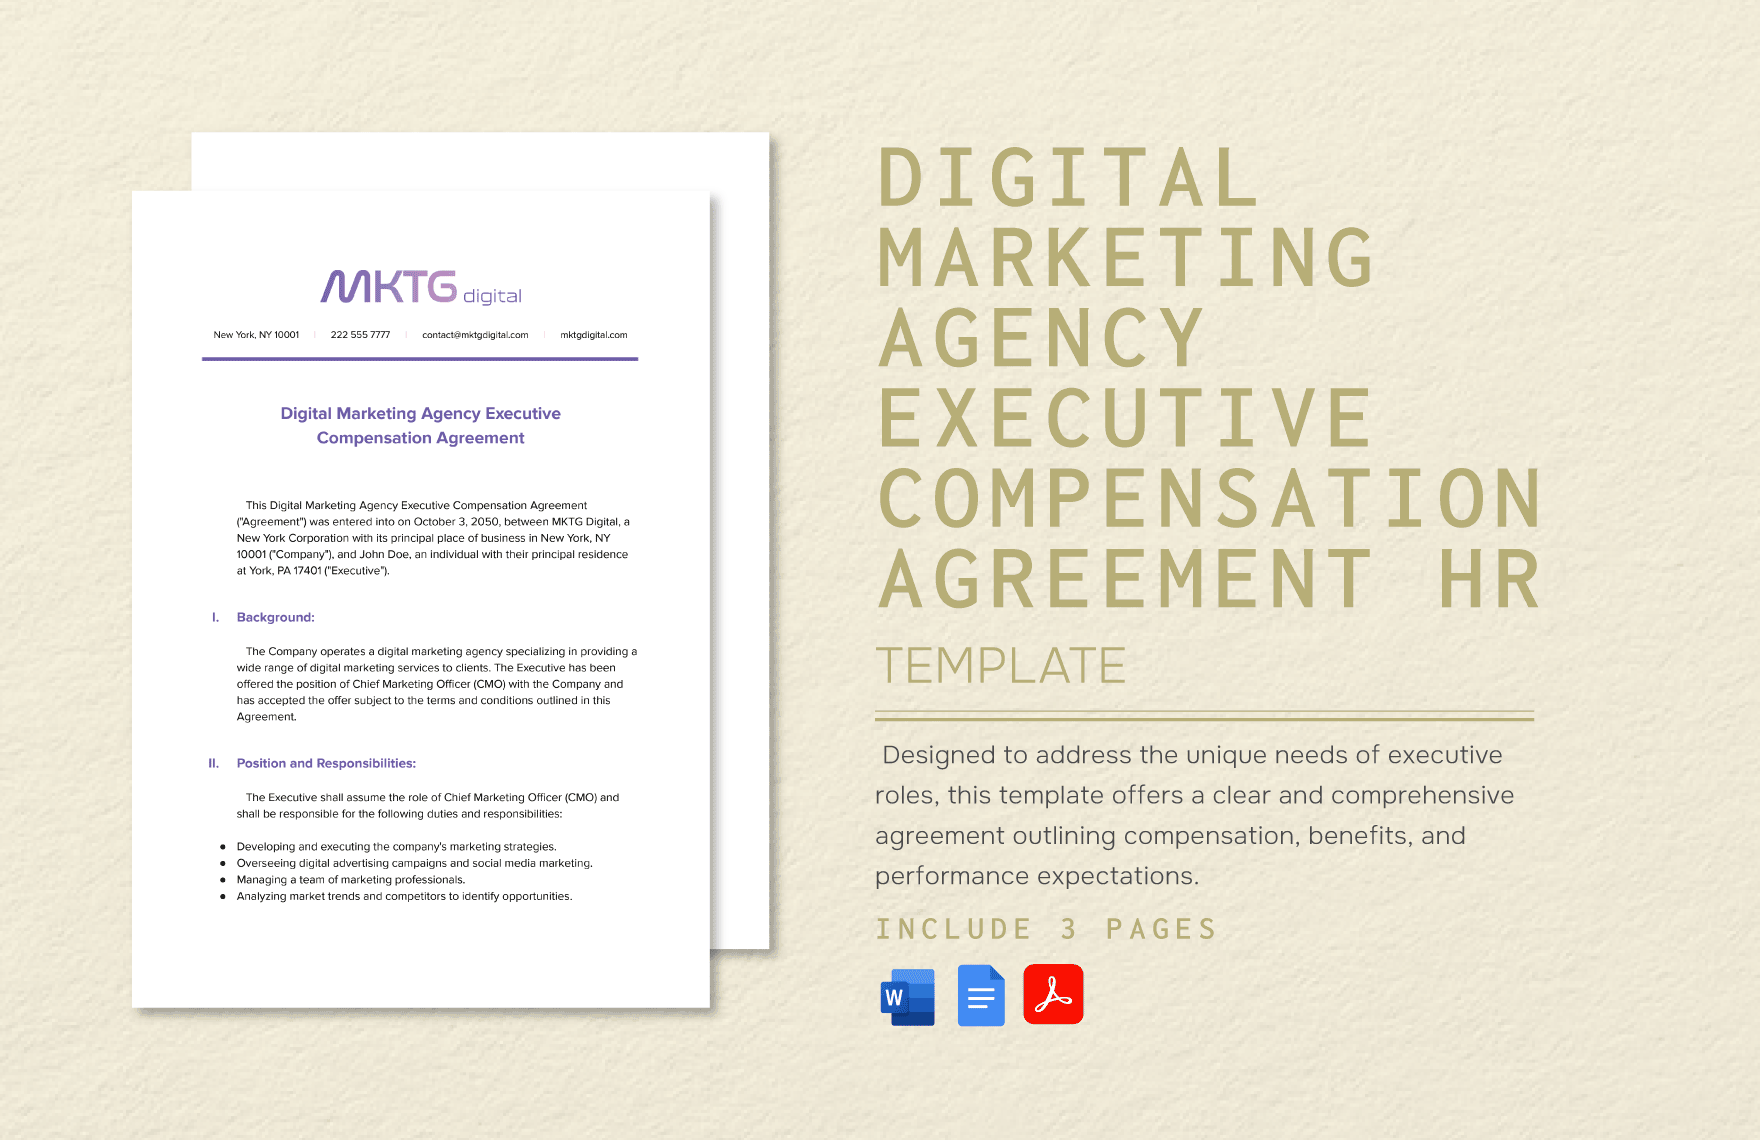 Digital Marketing Agency Executive Compensation Agreement HR Template